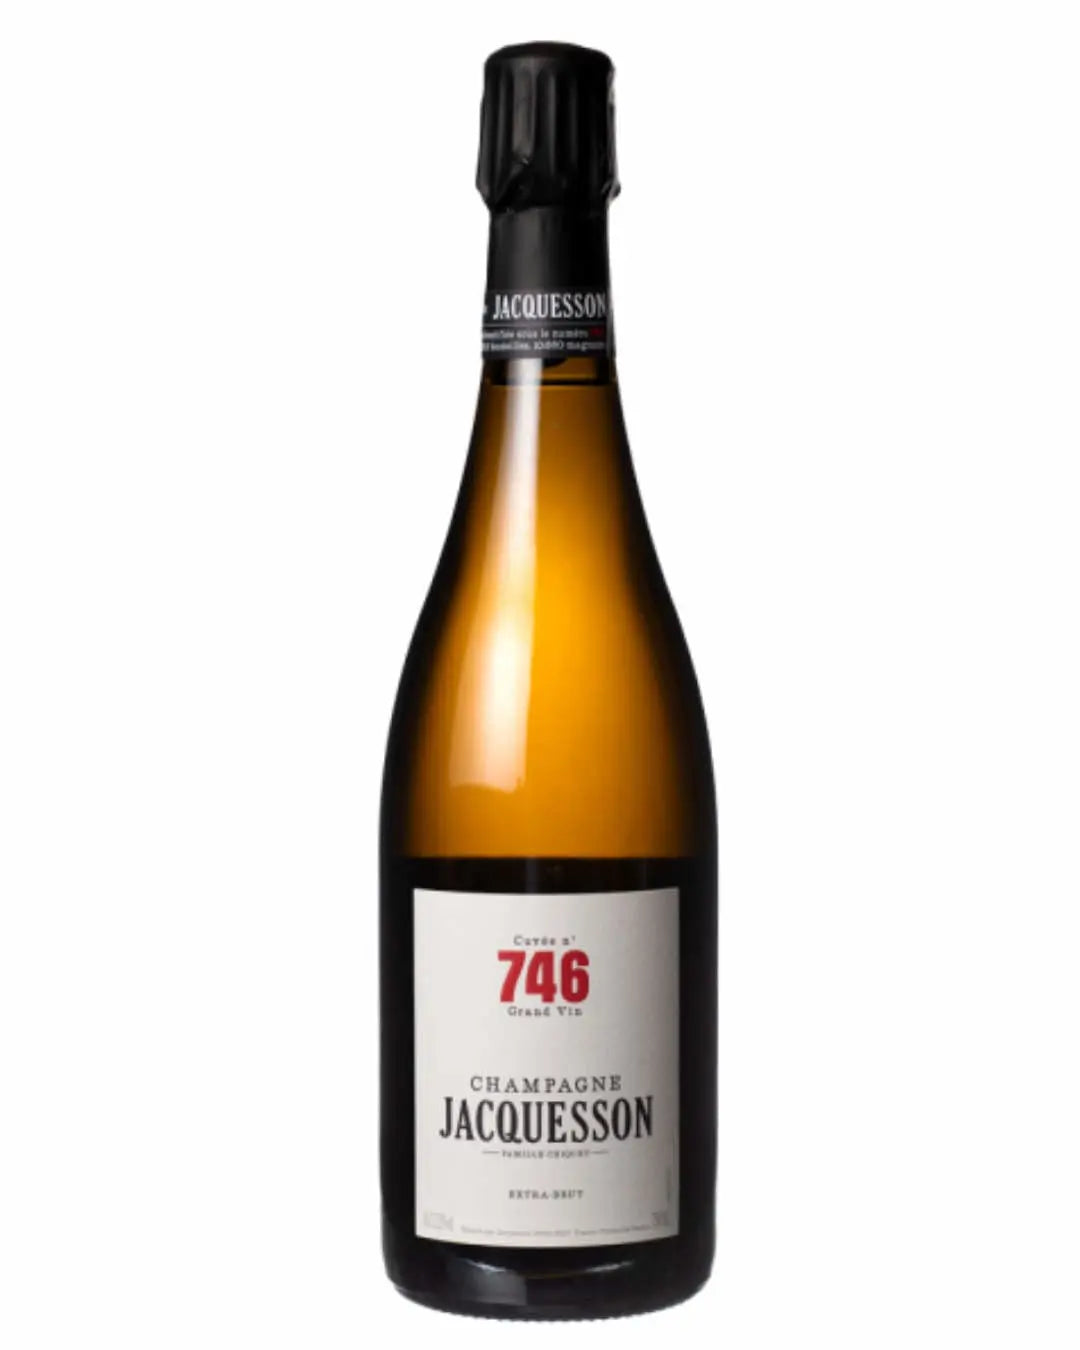 Jacquesson Champagne Cuvee 746, 75 cl Champagne & Sparkling